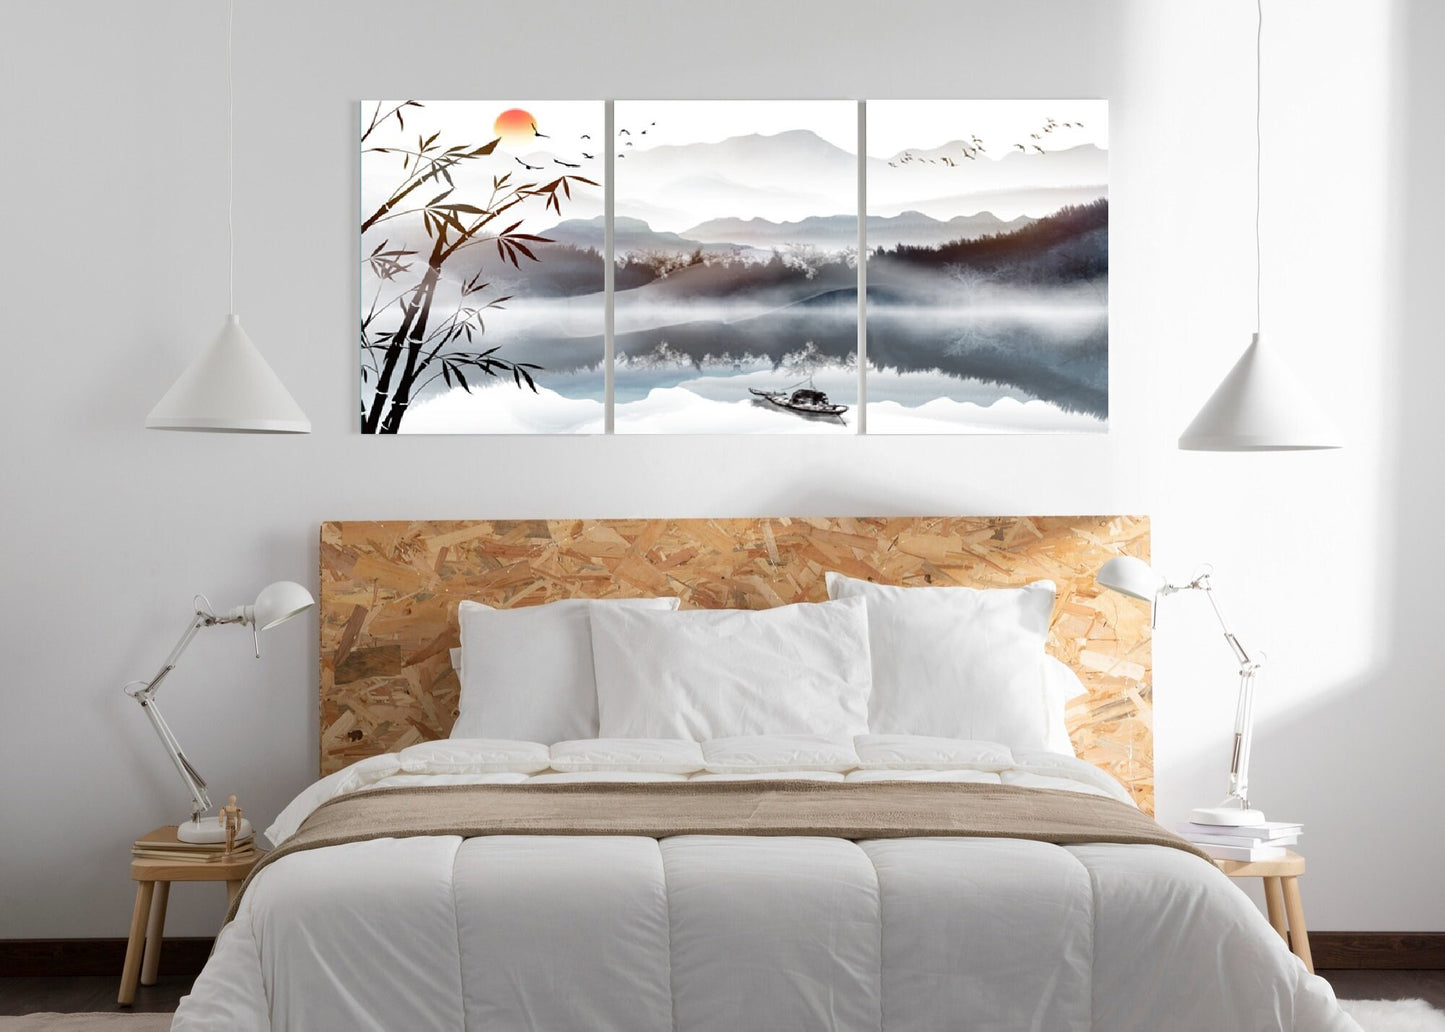 Large asian canvas wall art, smoky mountains hanging wall decor, modern oriental style wall art, printable lanscape artwork for bedroom